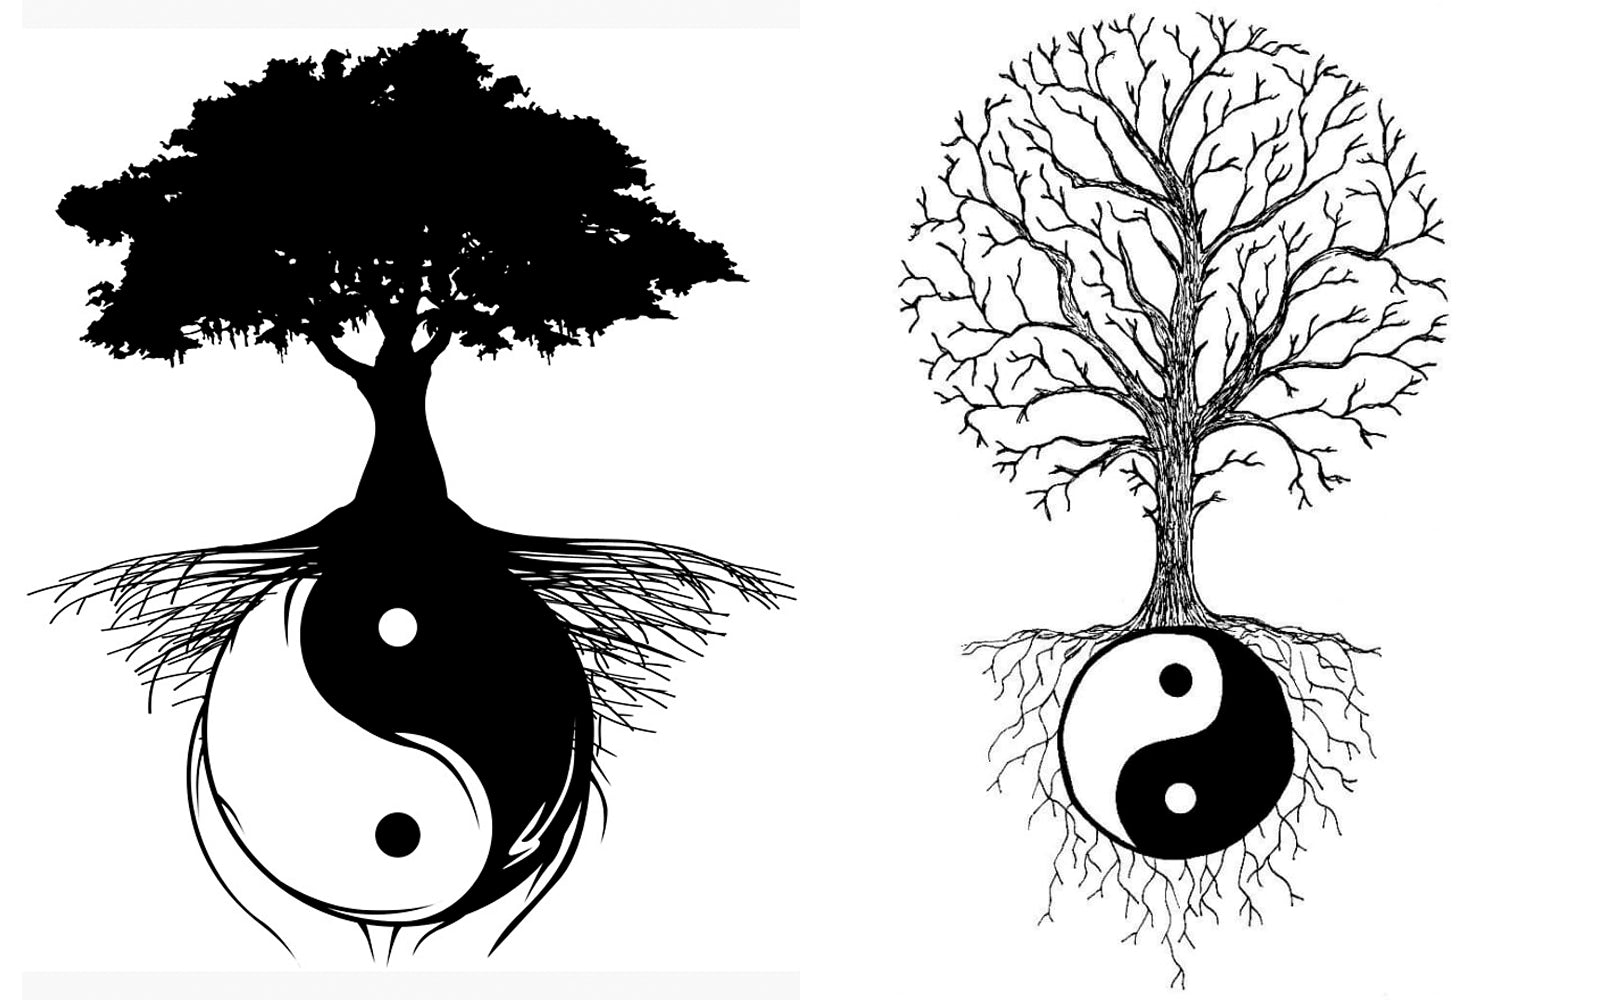 70 Powerful Tree of Life Tattoo Designs  Meaning 2023